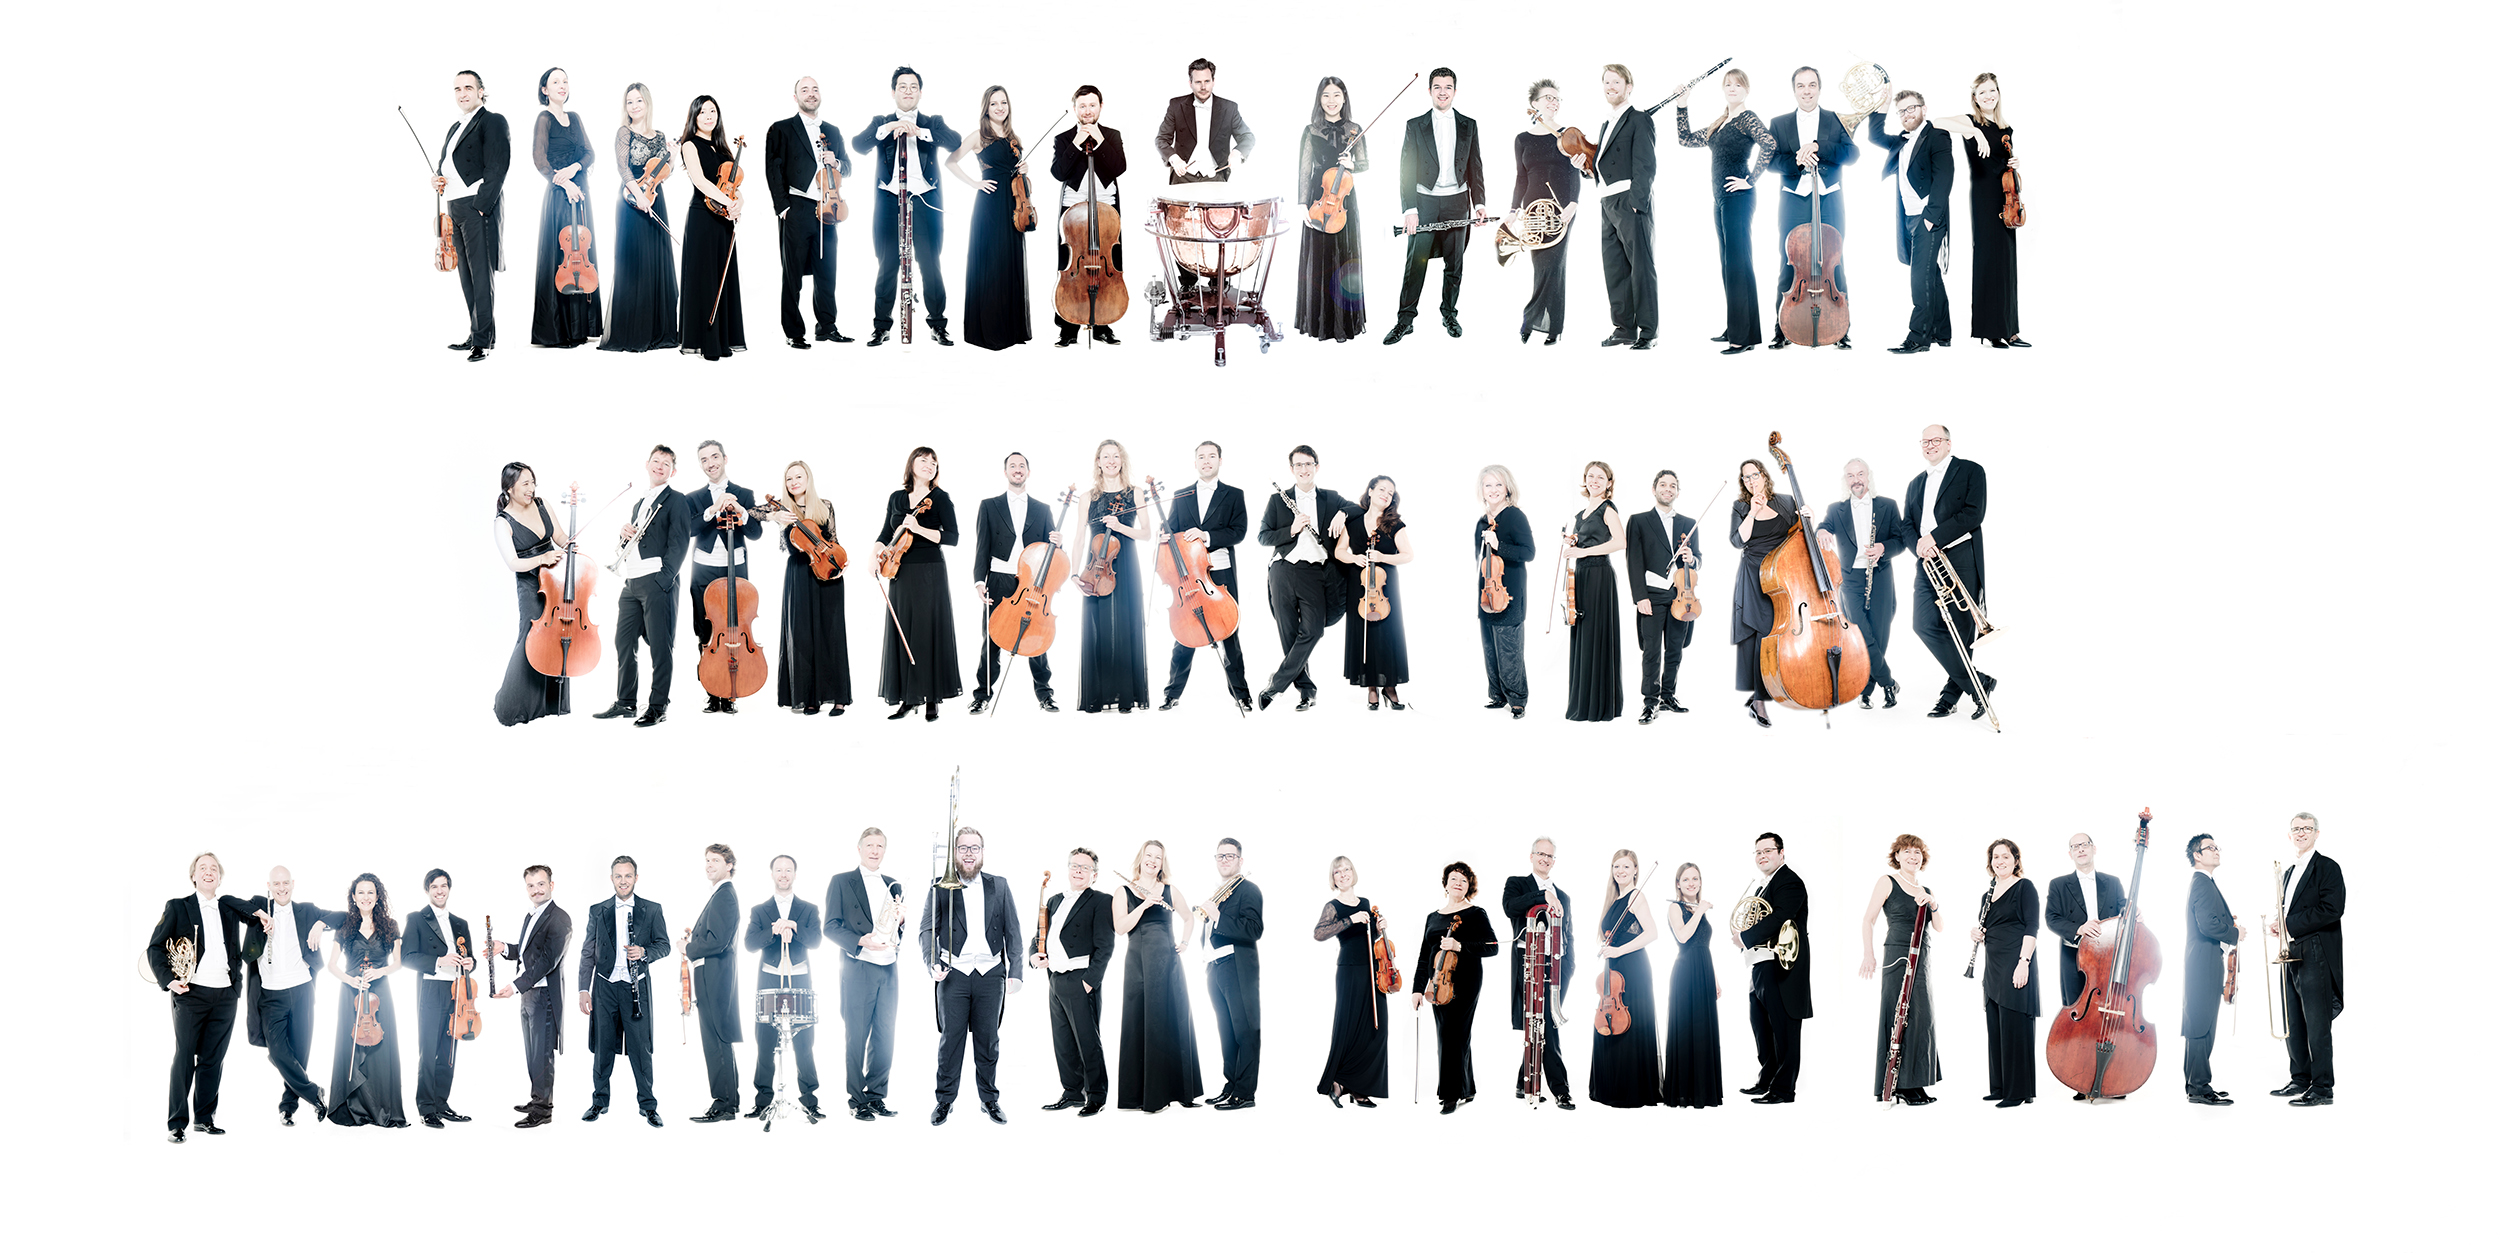 The musicians with their instruments stand in a loose row in front of a white background.